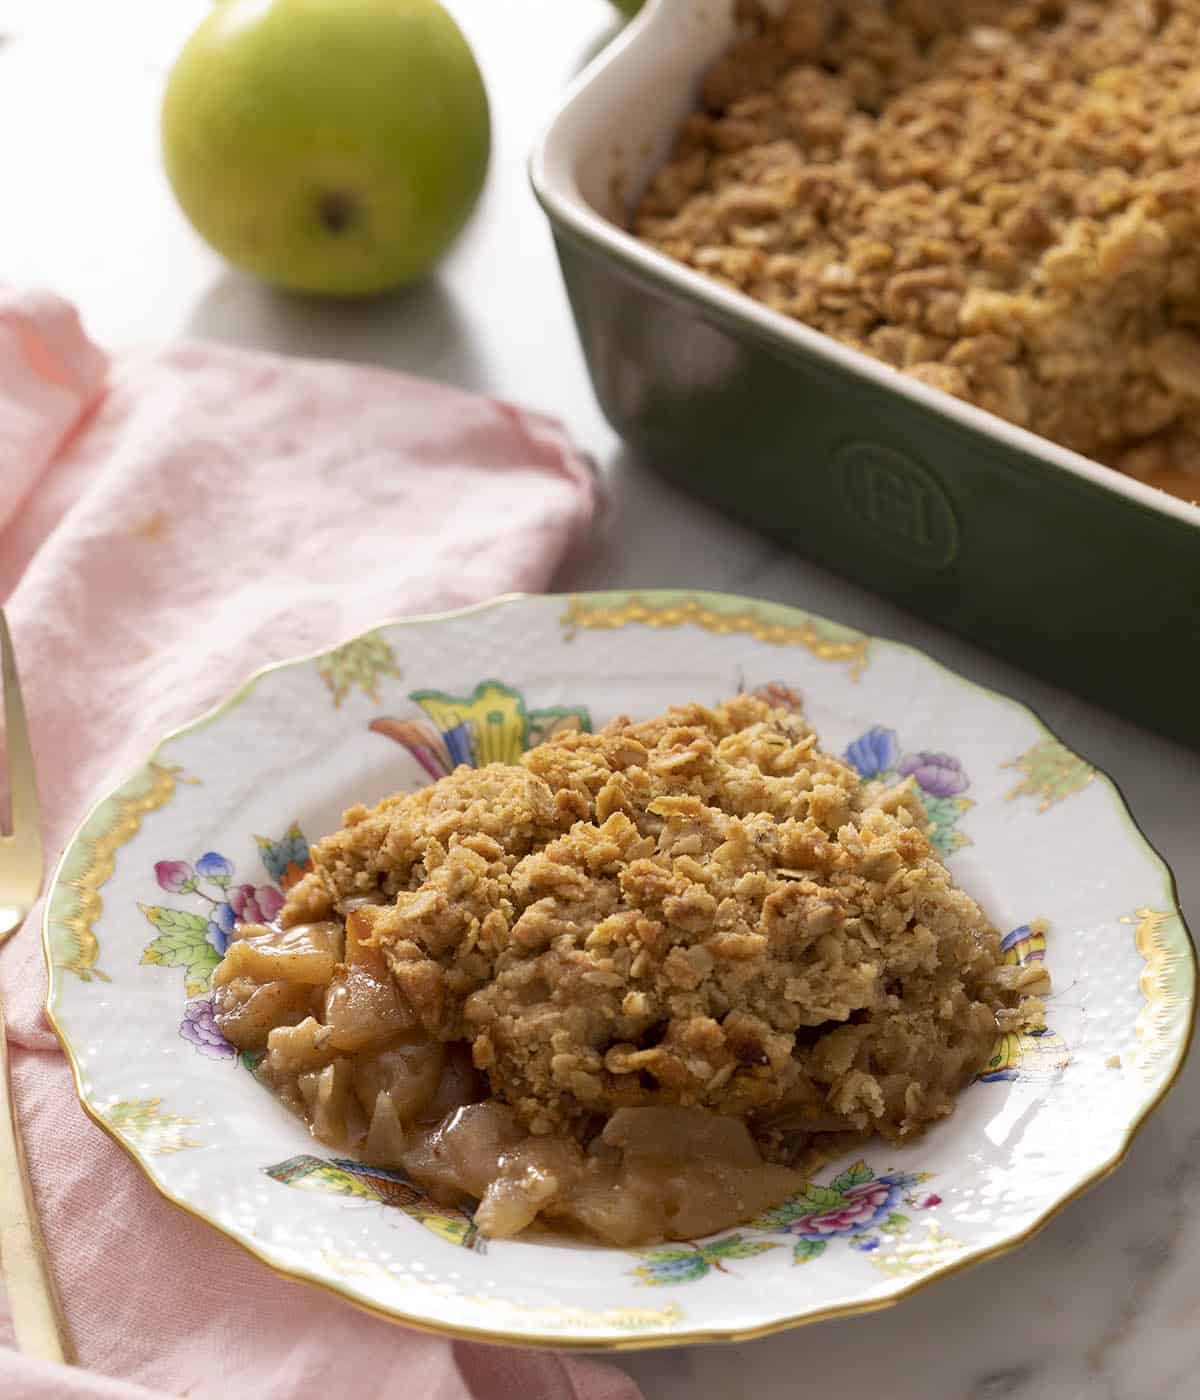 Apple crisp on a plate ready to eat.